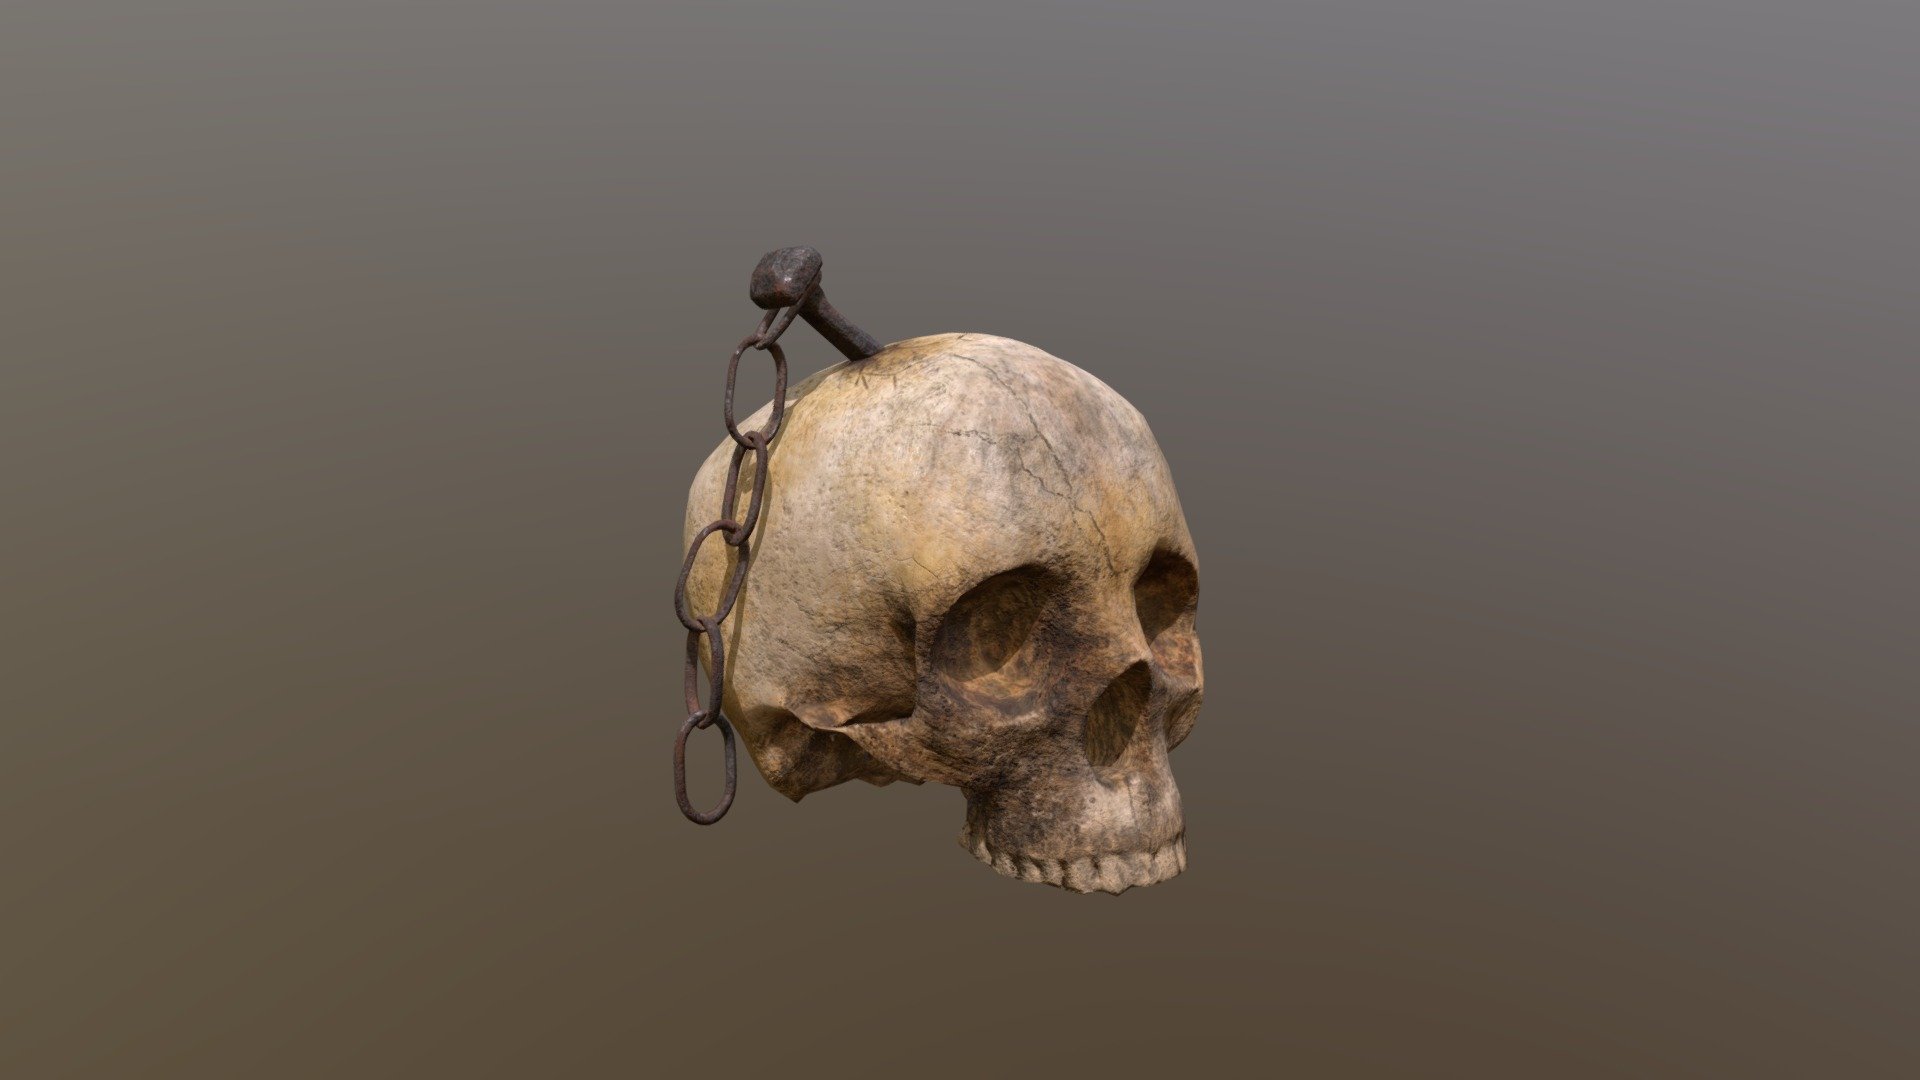 Old Impaled Skull 3D Model. This model contains the Old Impaled Skull itself

All modeled in Maya, textured with Substance Painter.

The model was built to scale and is UV unwrapped properly. Contains only one 4K texture set.

⦁ 7822 tris.

⦁ Contains: .FBX .OBJ and .DAE

⦁ Model has clean topology. No Ngons.

⦁ Built to scale

⦁ Unwrapped UV Map

⦁ 4K Texture set

⦁ High quality details

⦁ Based on real life references

⦁ Renders done in Marmoset Toolbag

Polycount:

Verts 3921

Edges 7856

Faces 3933

Tris 7822

If you have any questions please feel free to ask me 3d model